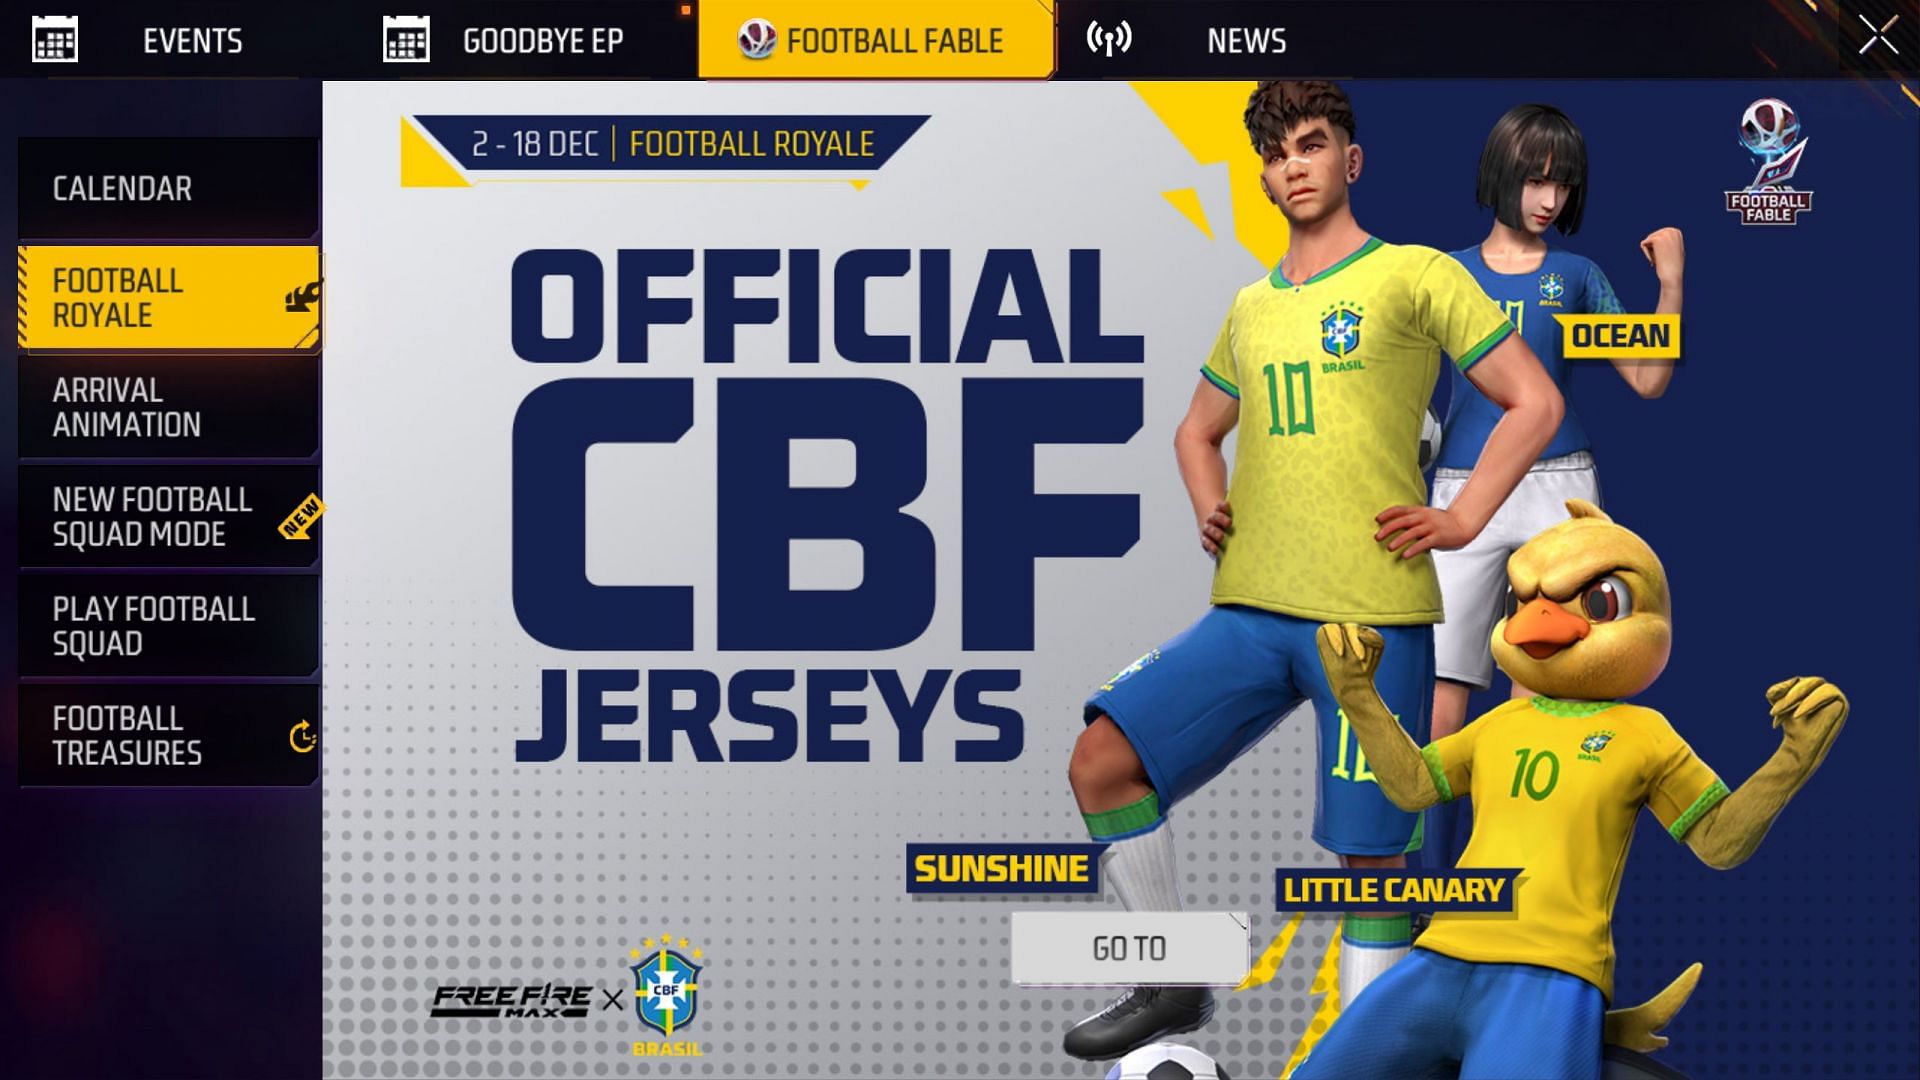 You will have to select the Football Treasures tab from the menu (Image via Garena)